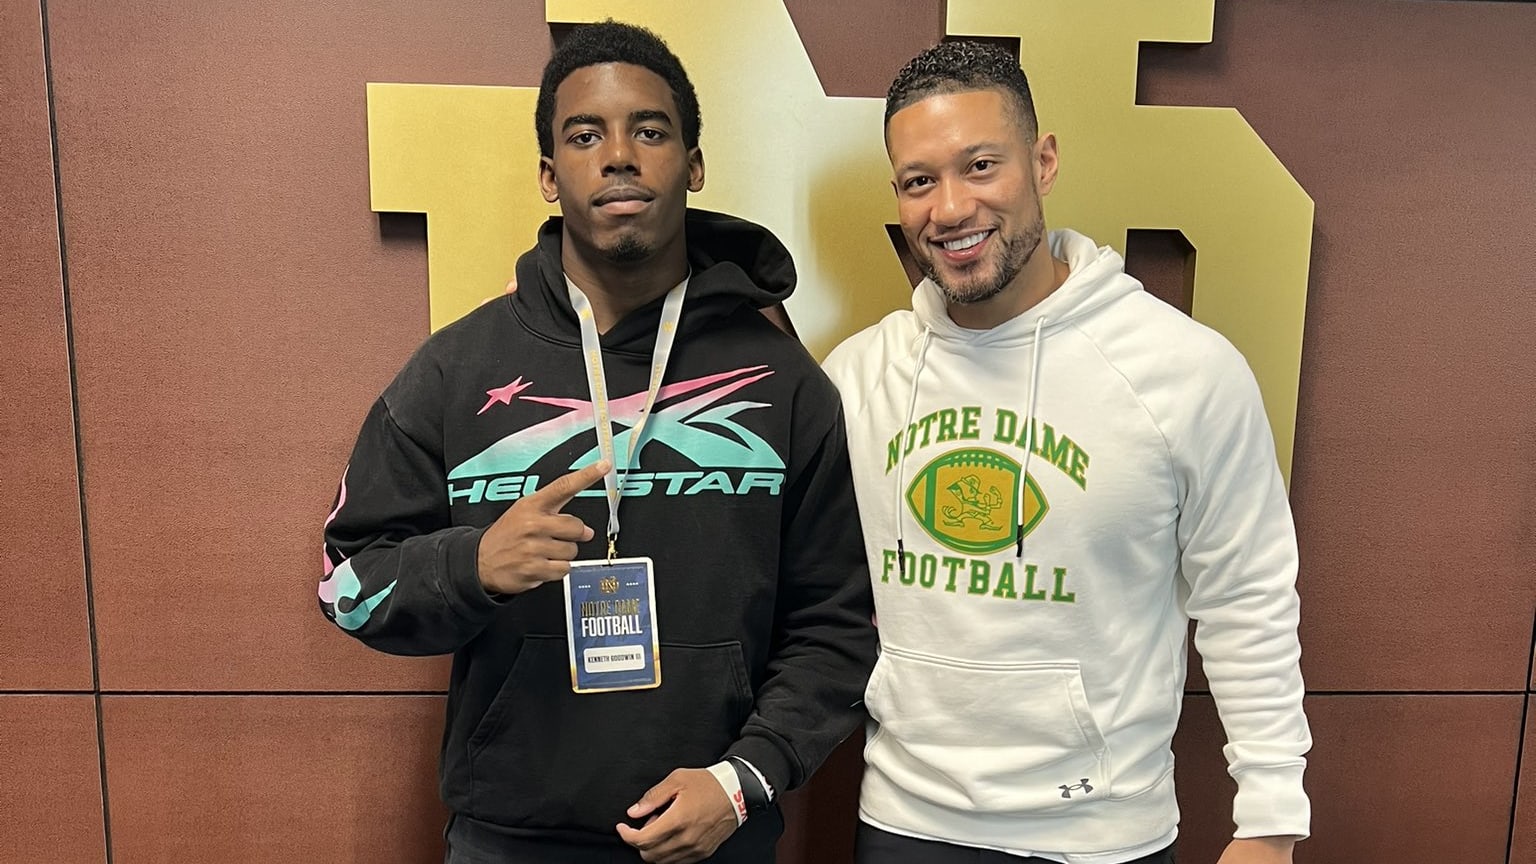 Top 2026 LB Kenneth Goodwin Impressed by Notre Dame Visit